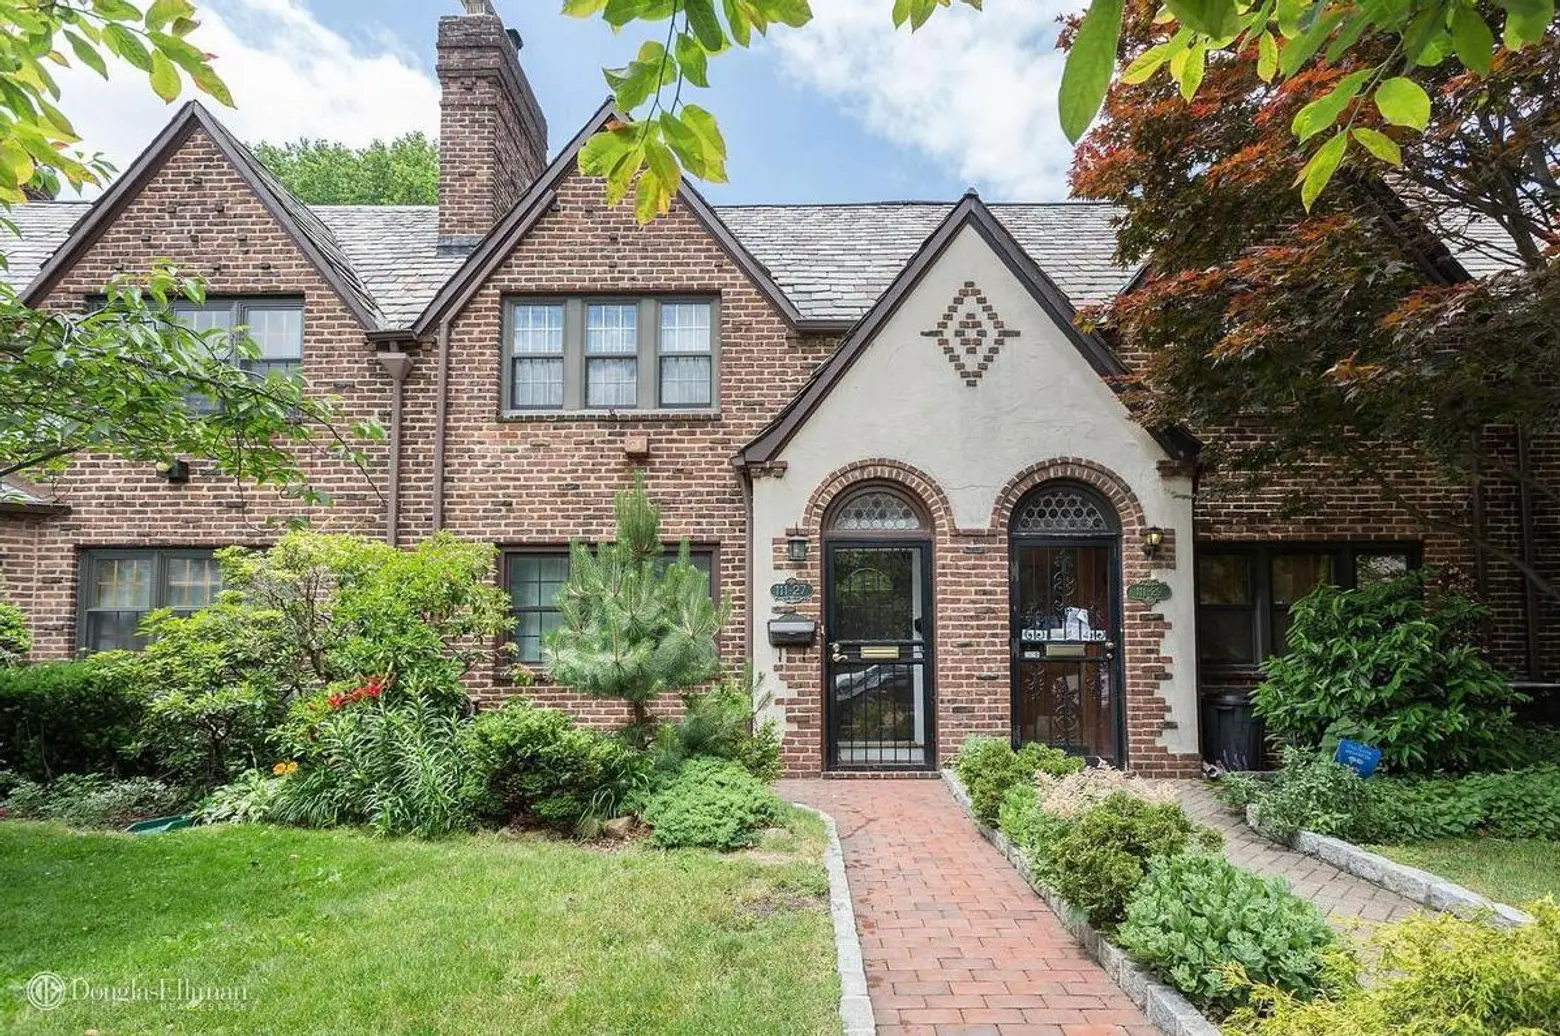 $1.3M Arbor Close Tudor is a reminder of the 1920s ‘garden city’ movement